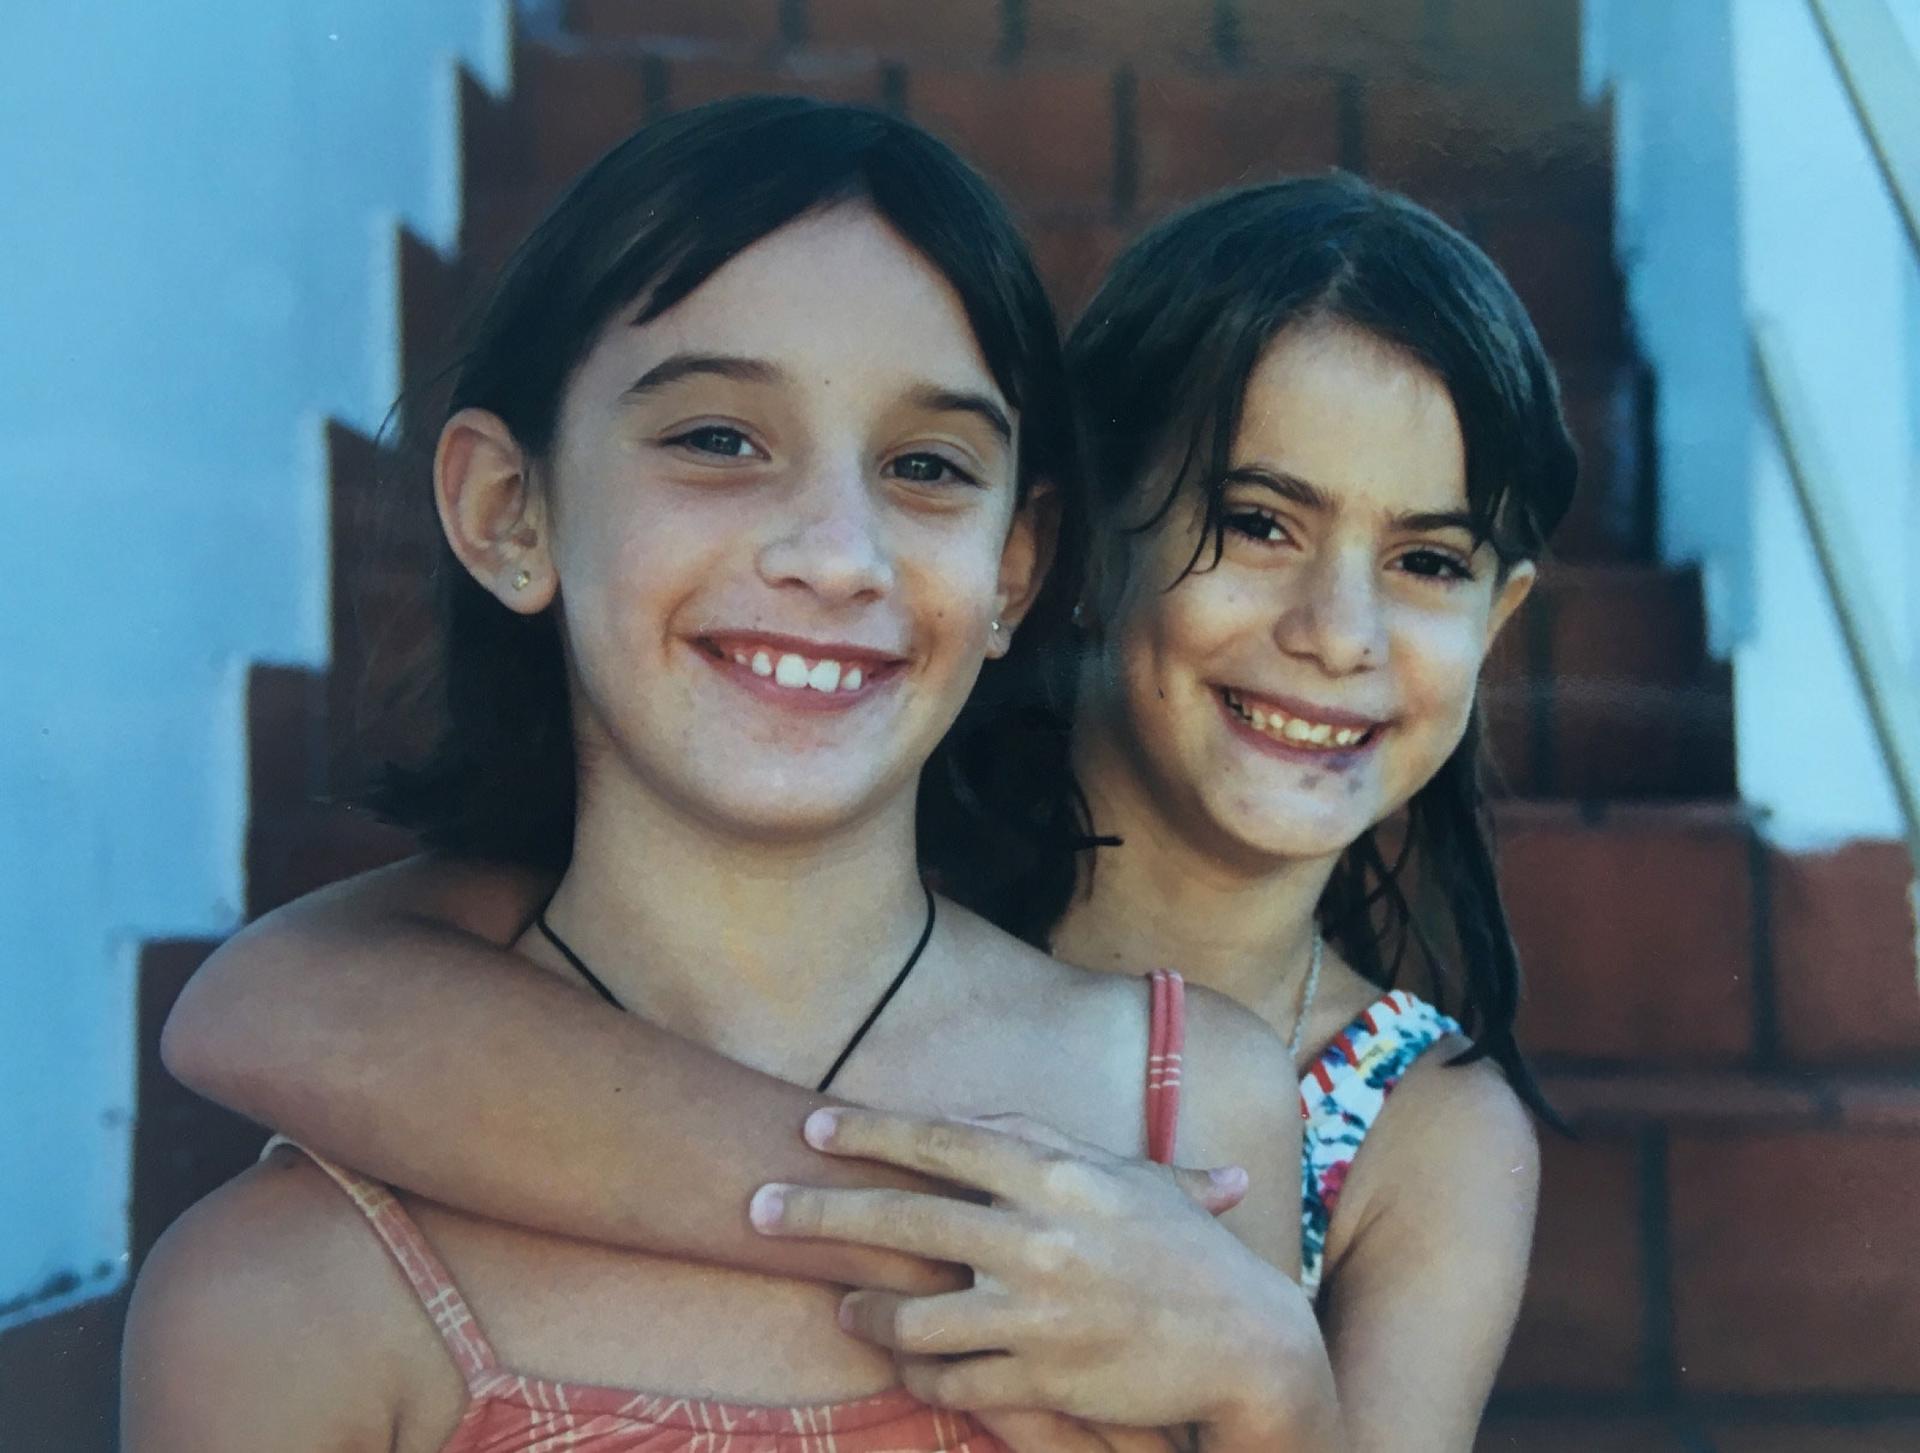 Lucía with her friend, Agustina, just months before moving to Texas.